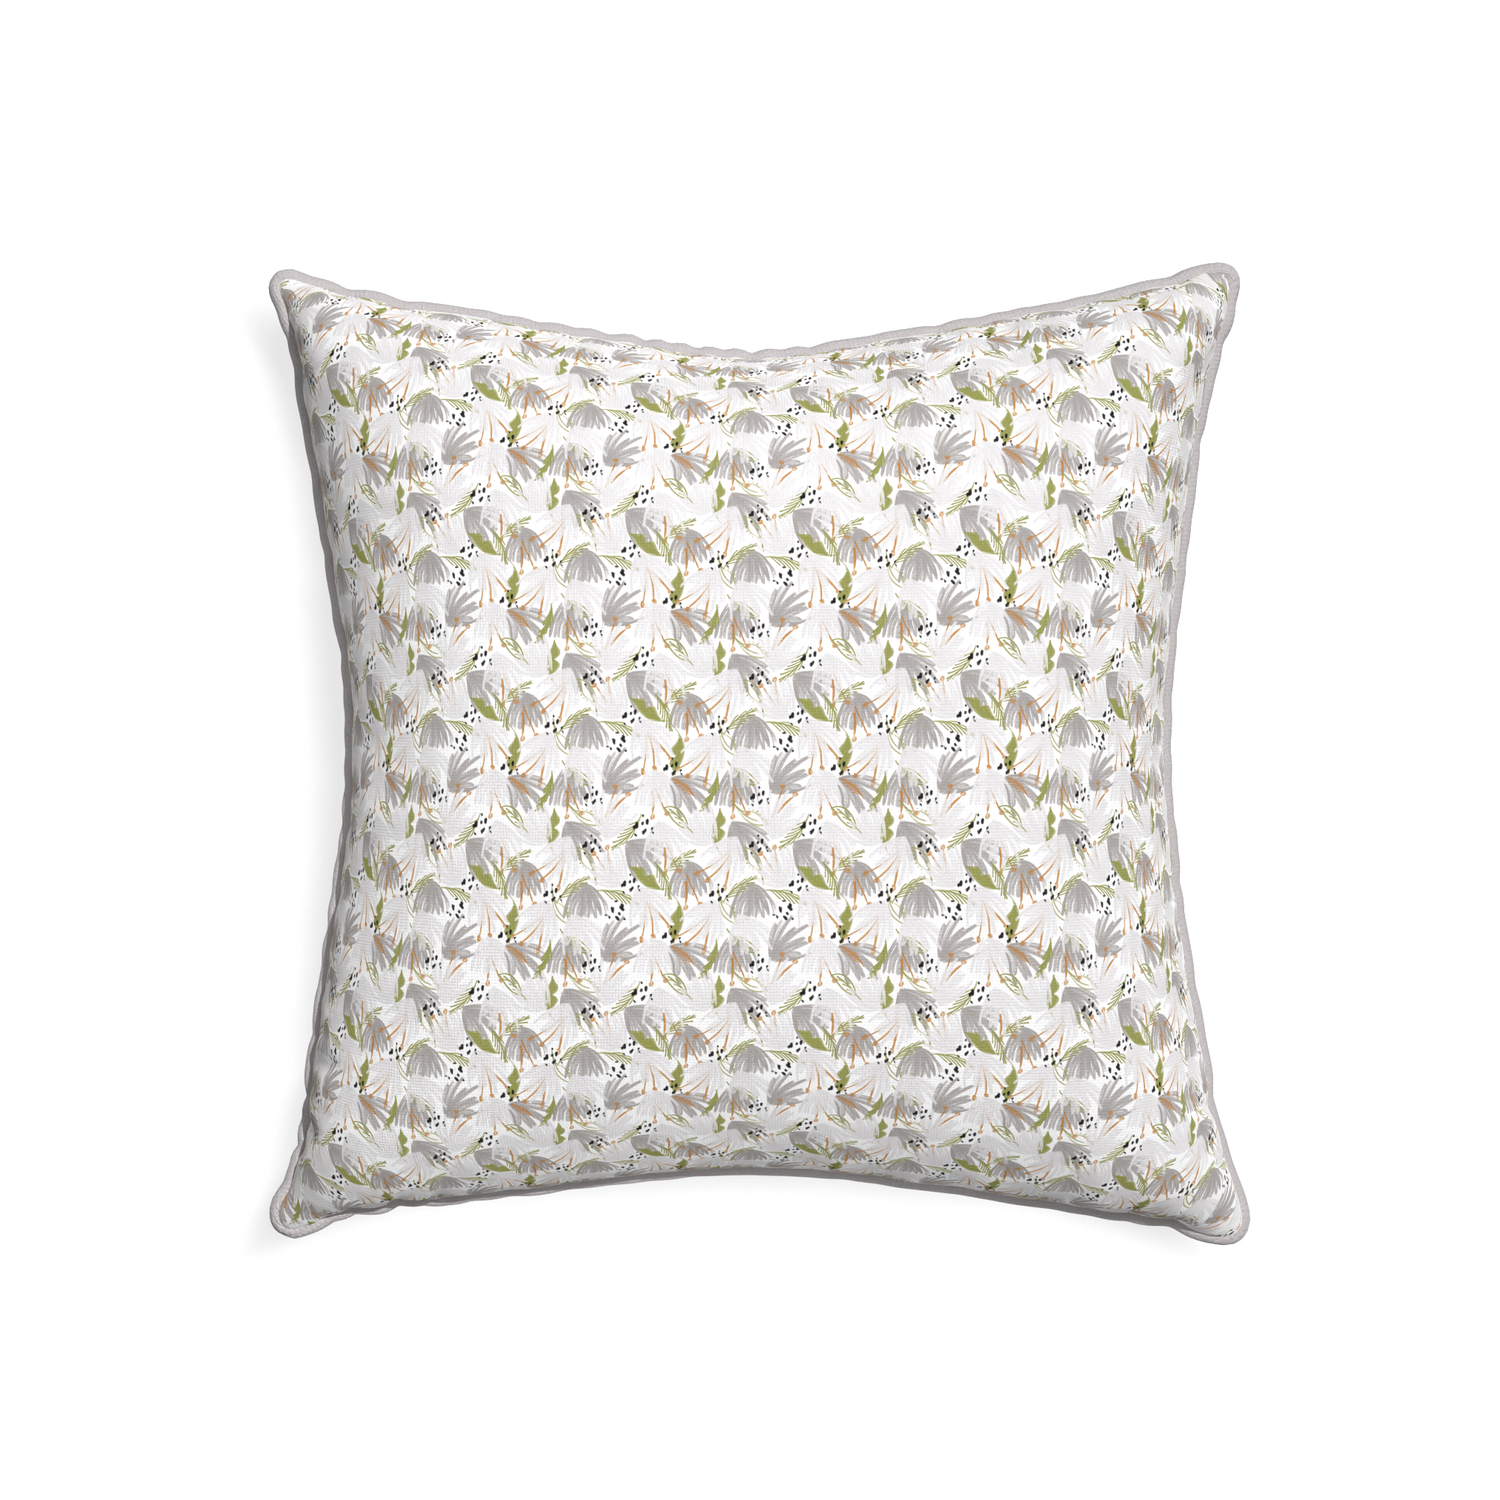 22-square eden grey custom grey floralpillow with pebble piping on white background